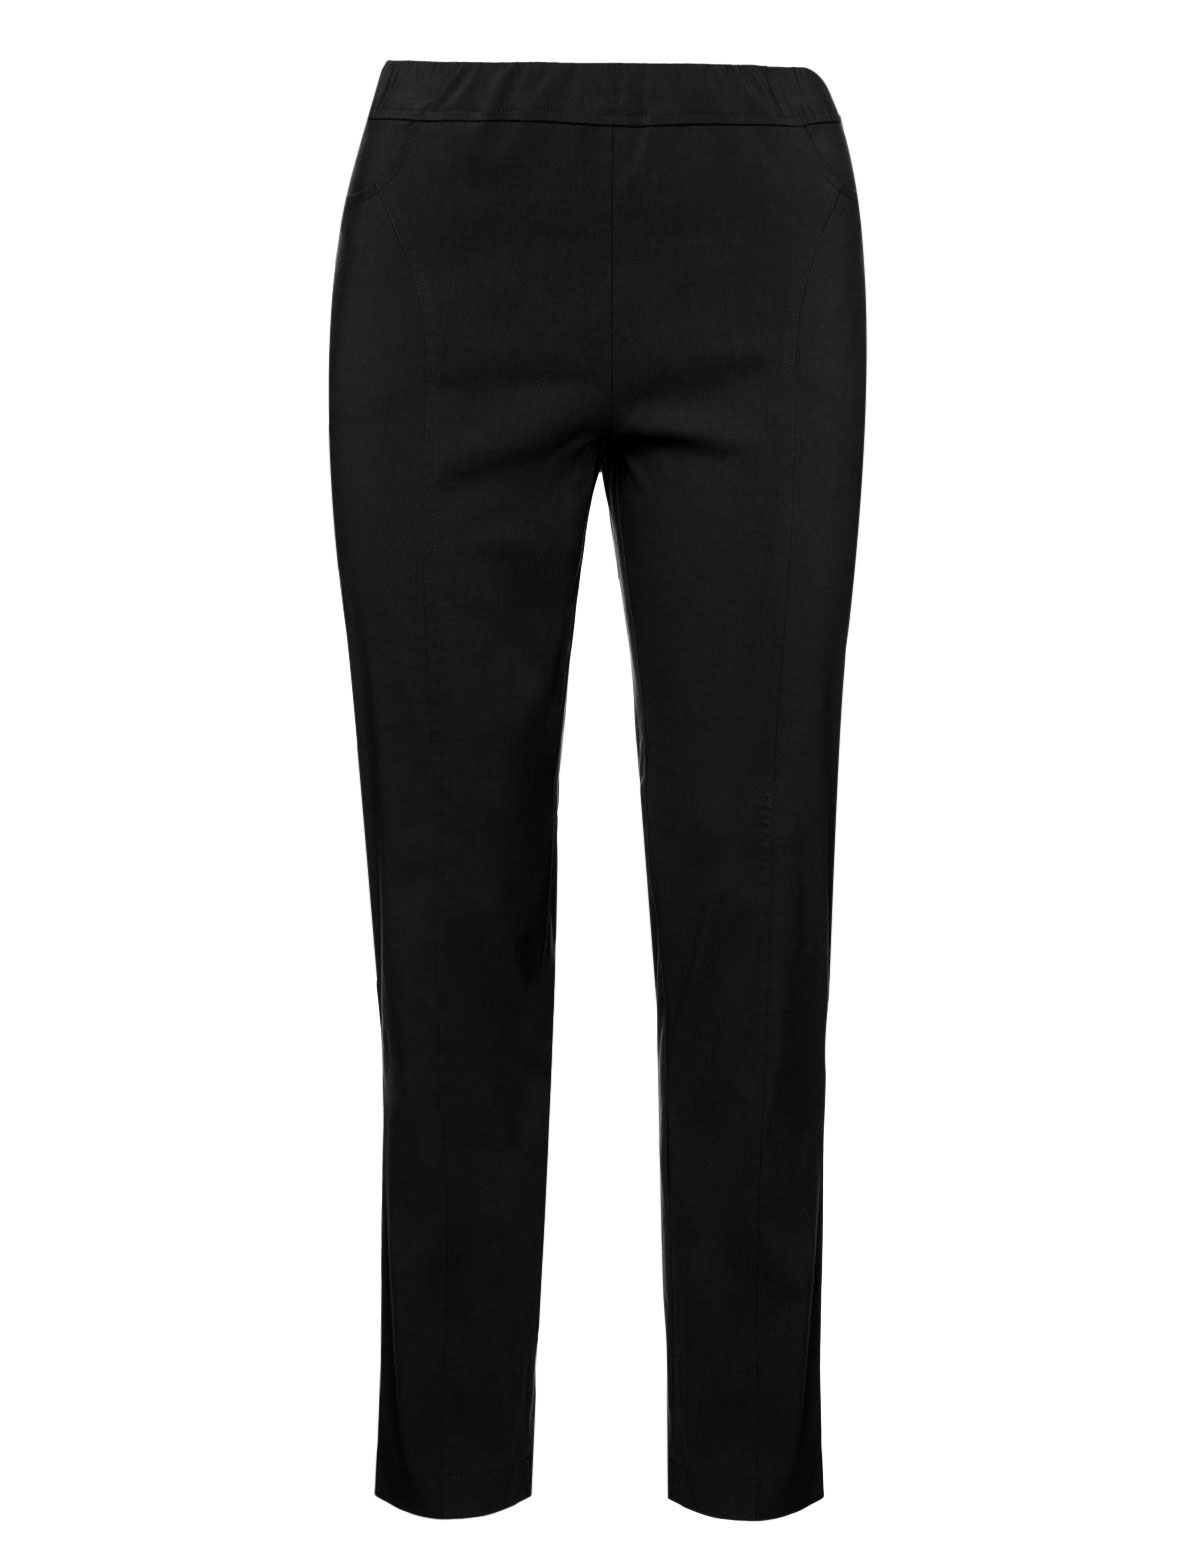 Trousers with elasticated waistband - Shop Trousers at navabi ...